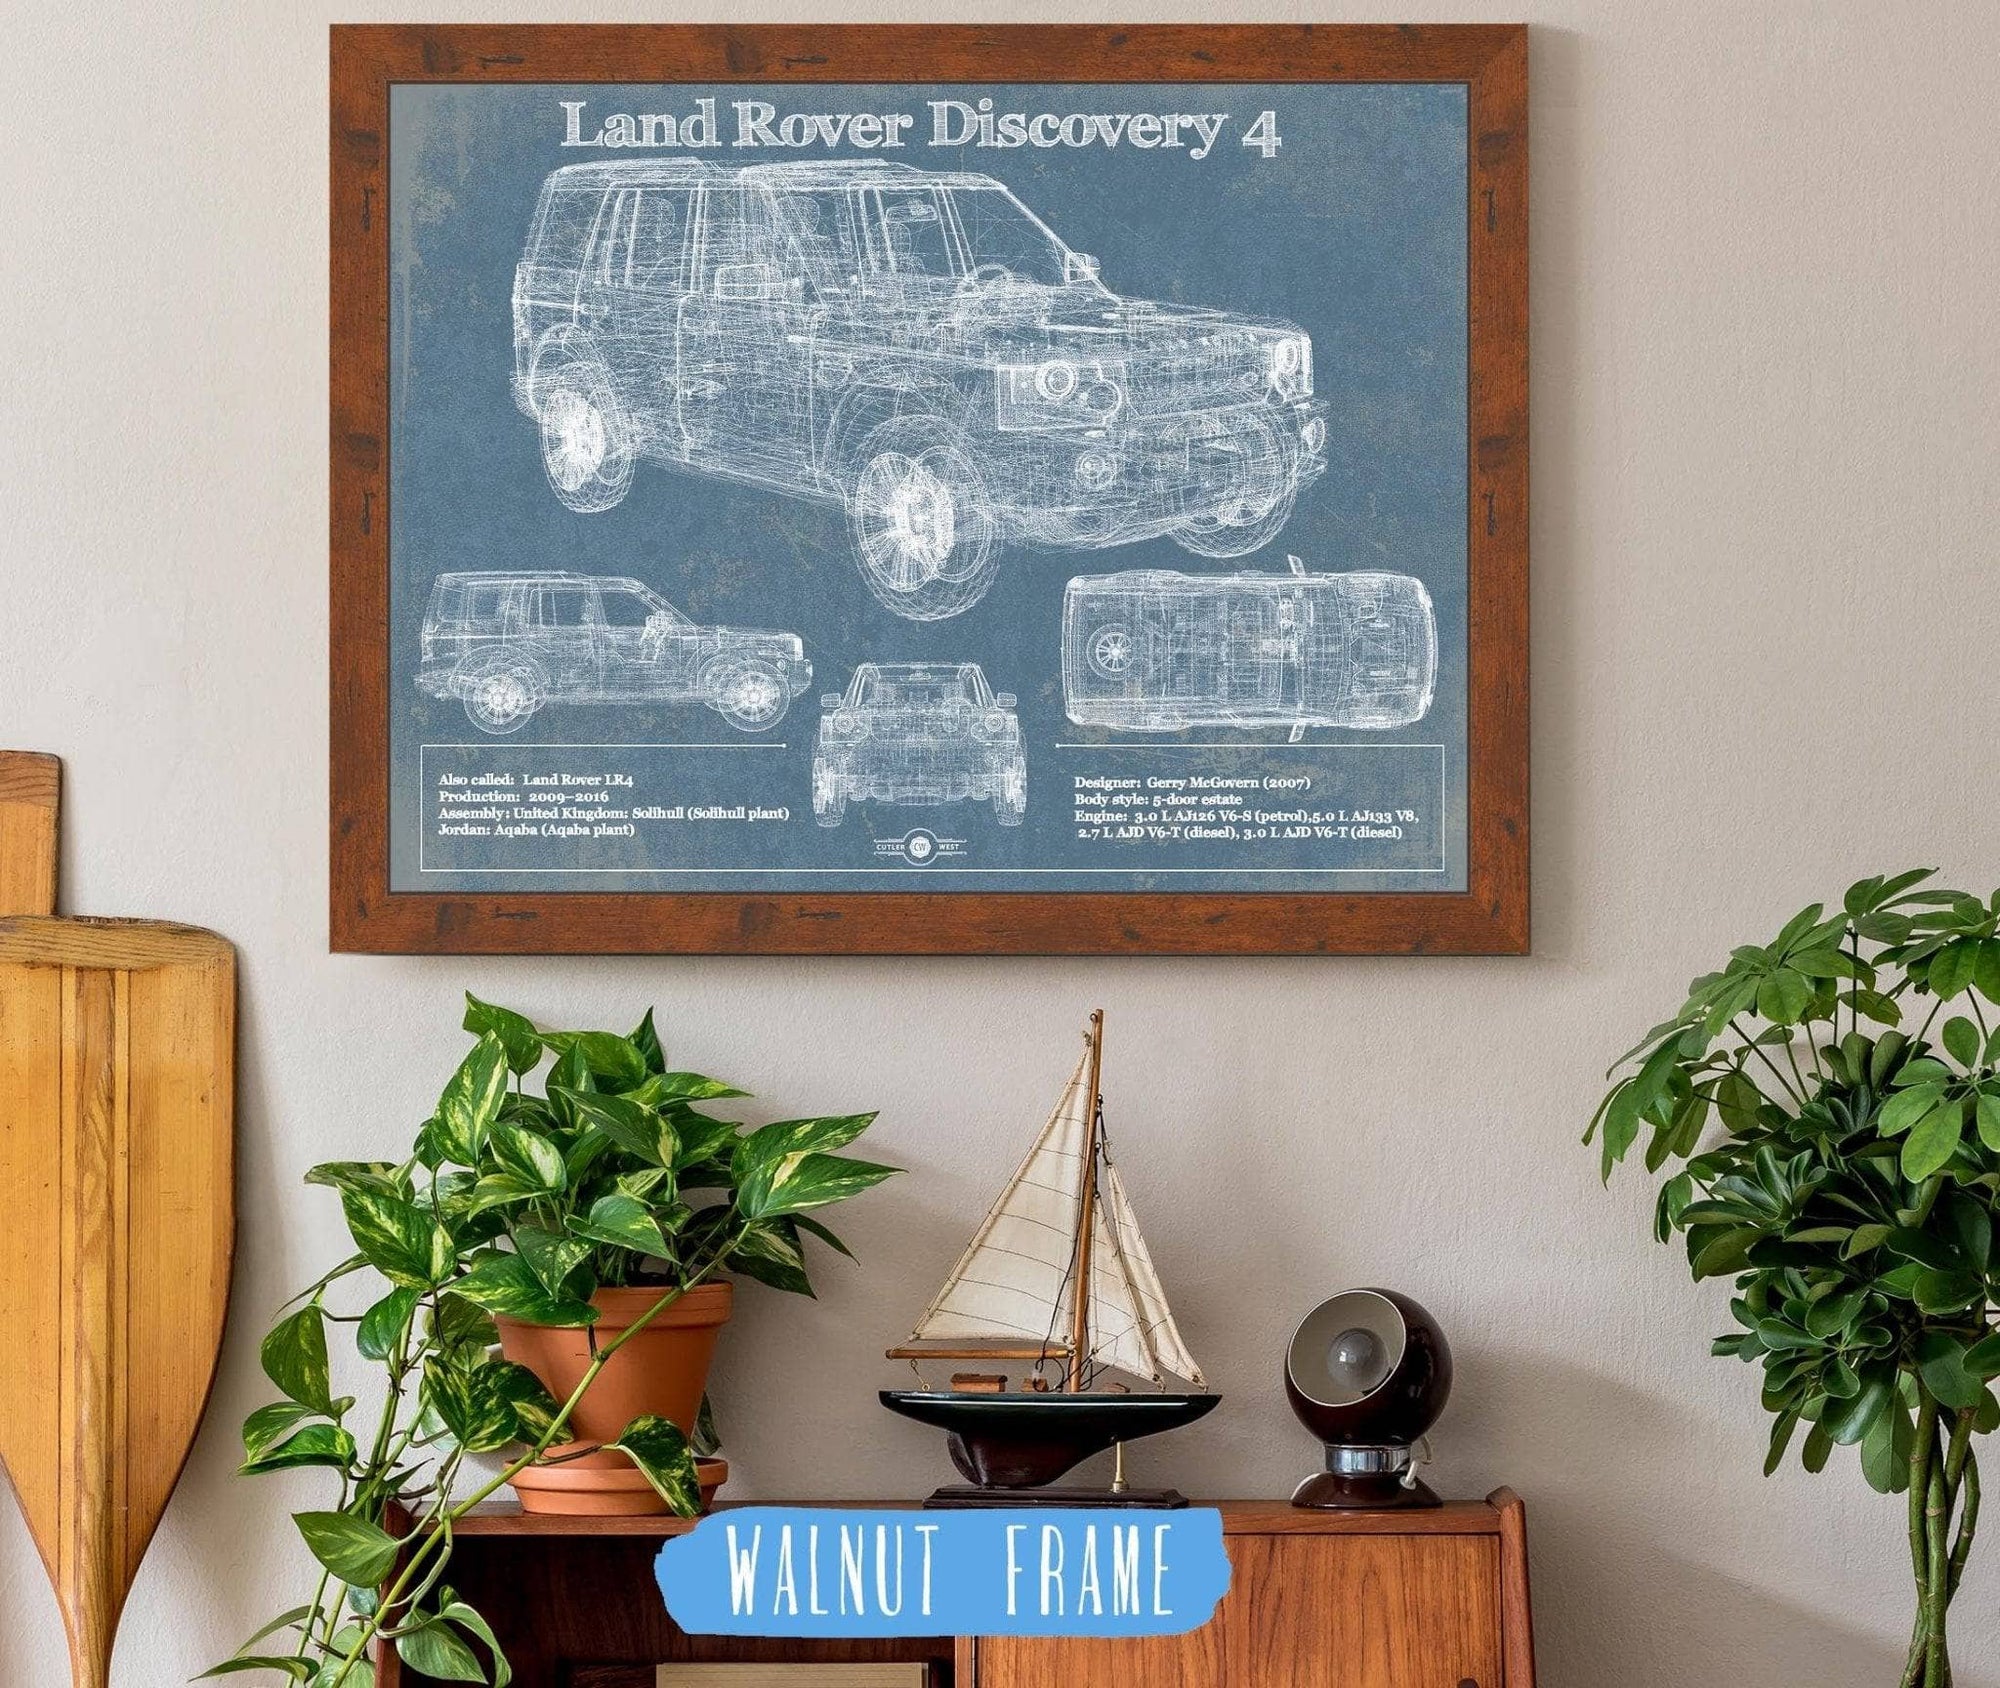 Cutler West Land Rover Collection 14" x 11" / Walnut Frame Land Rover Discovery 4 Blueprint Vintage Auto Patent Print 906705570